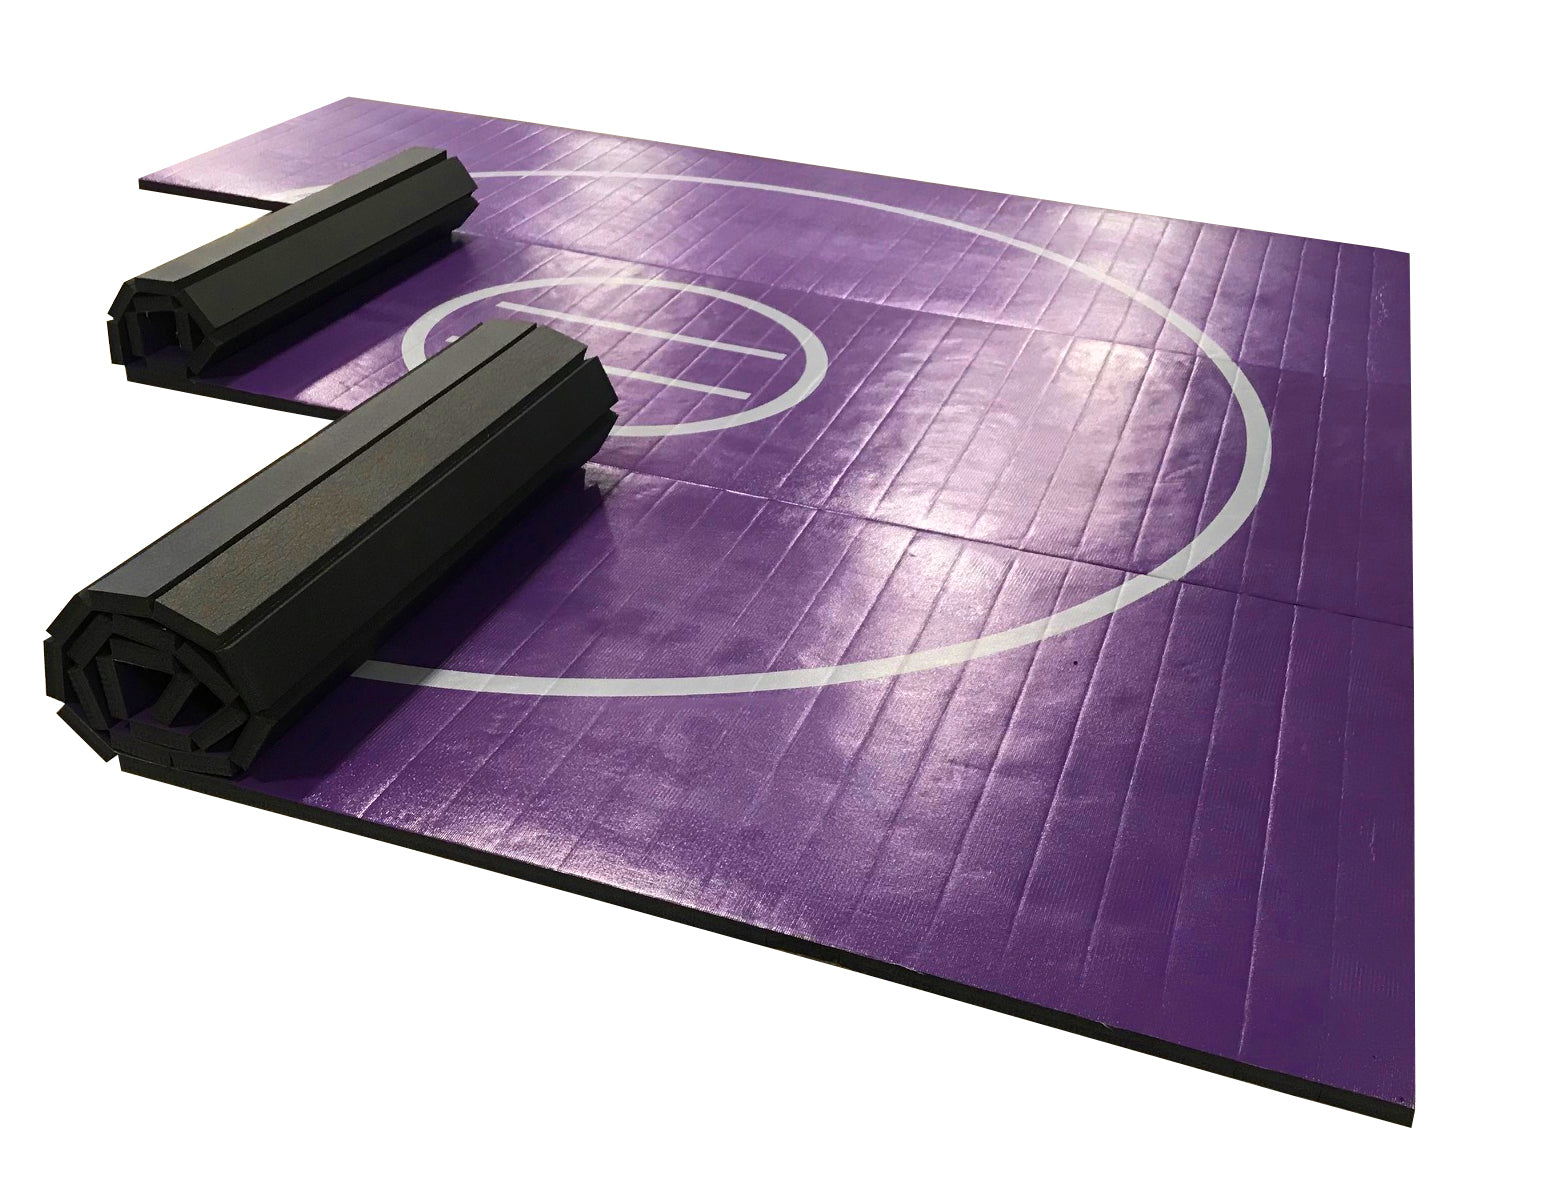 12' x 12' x 1 3/8" Purple and Gray Roll-Up Wrestling Mat